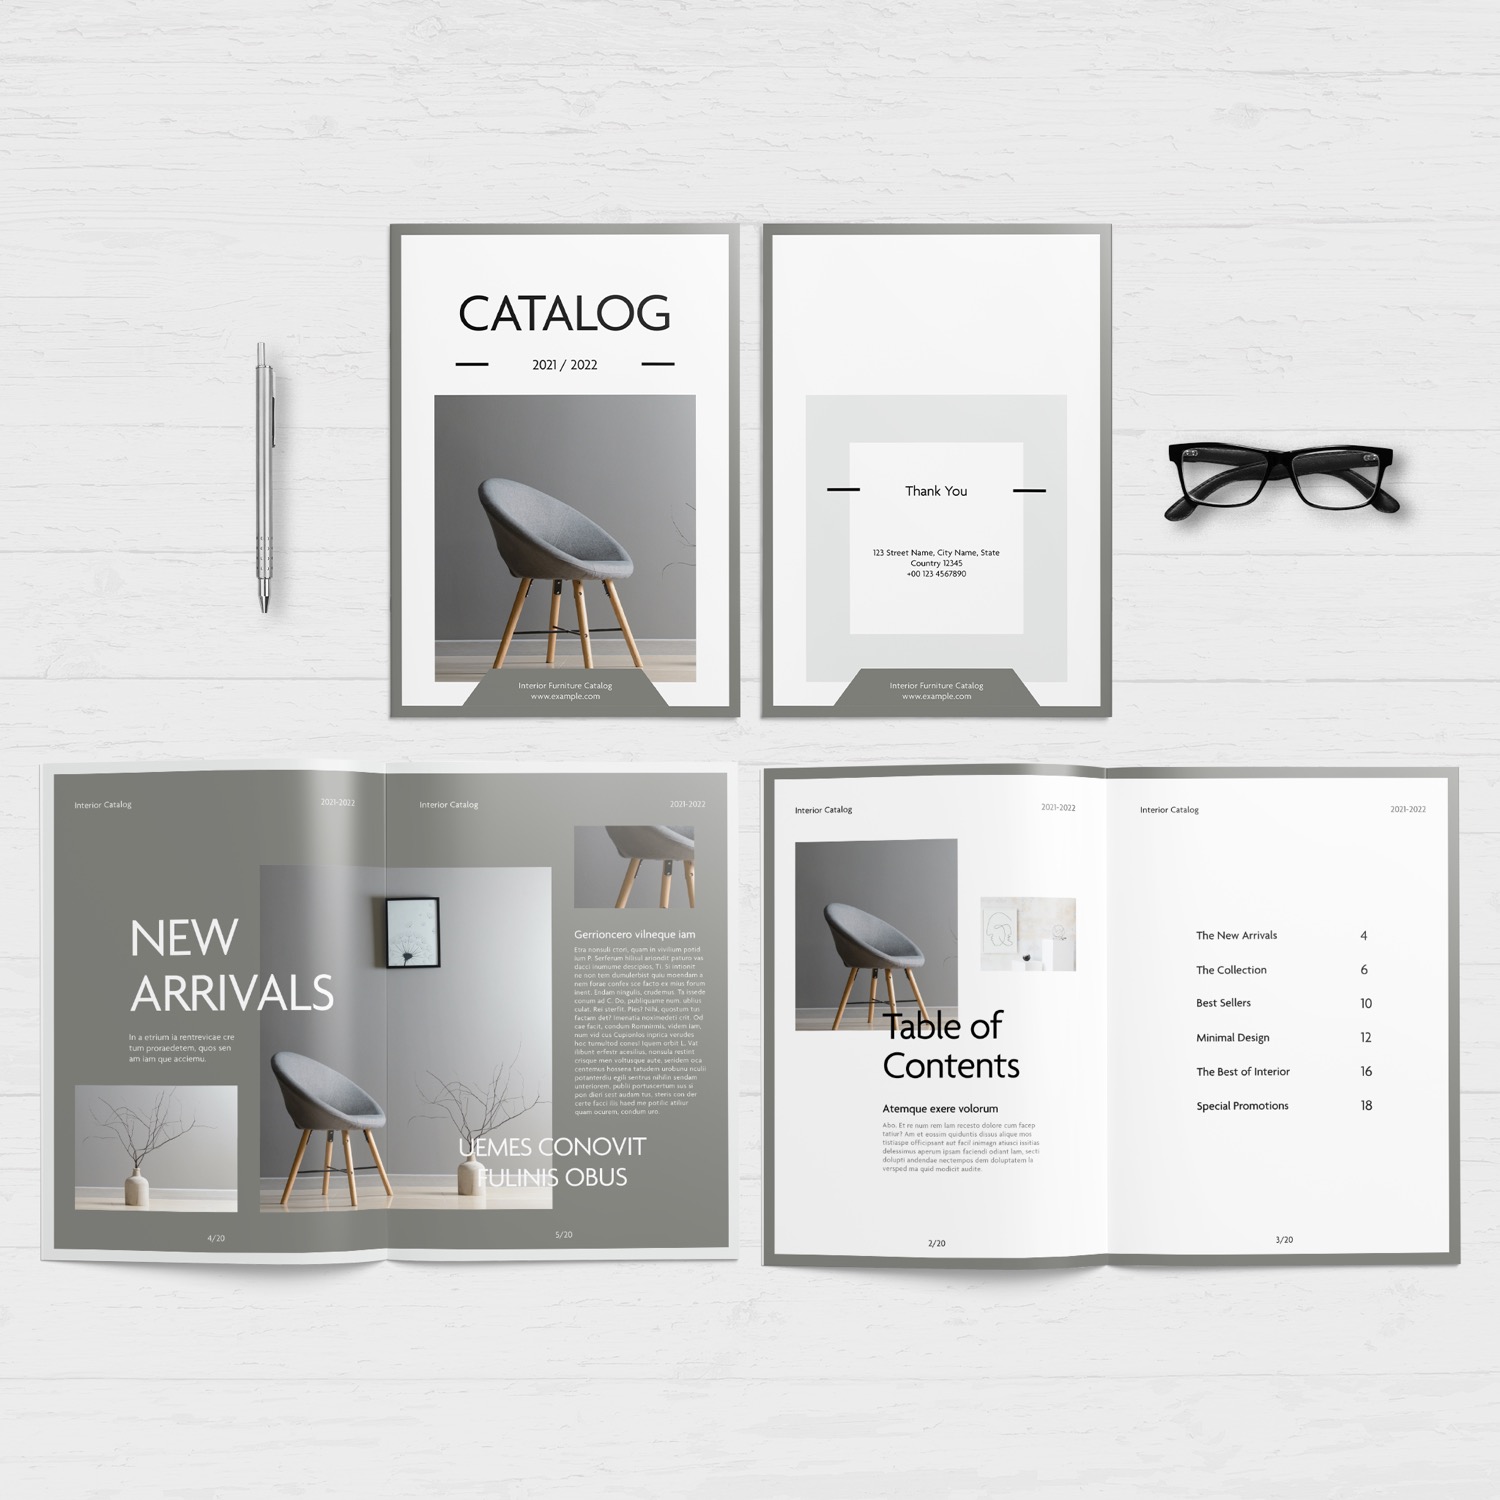 Free-Interior-Product-Catalog-InDesign-Layout-Template